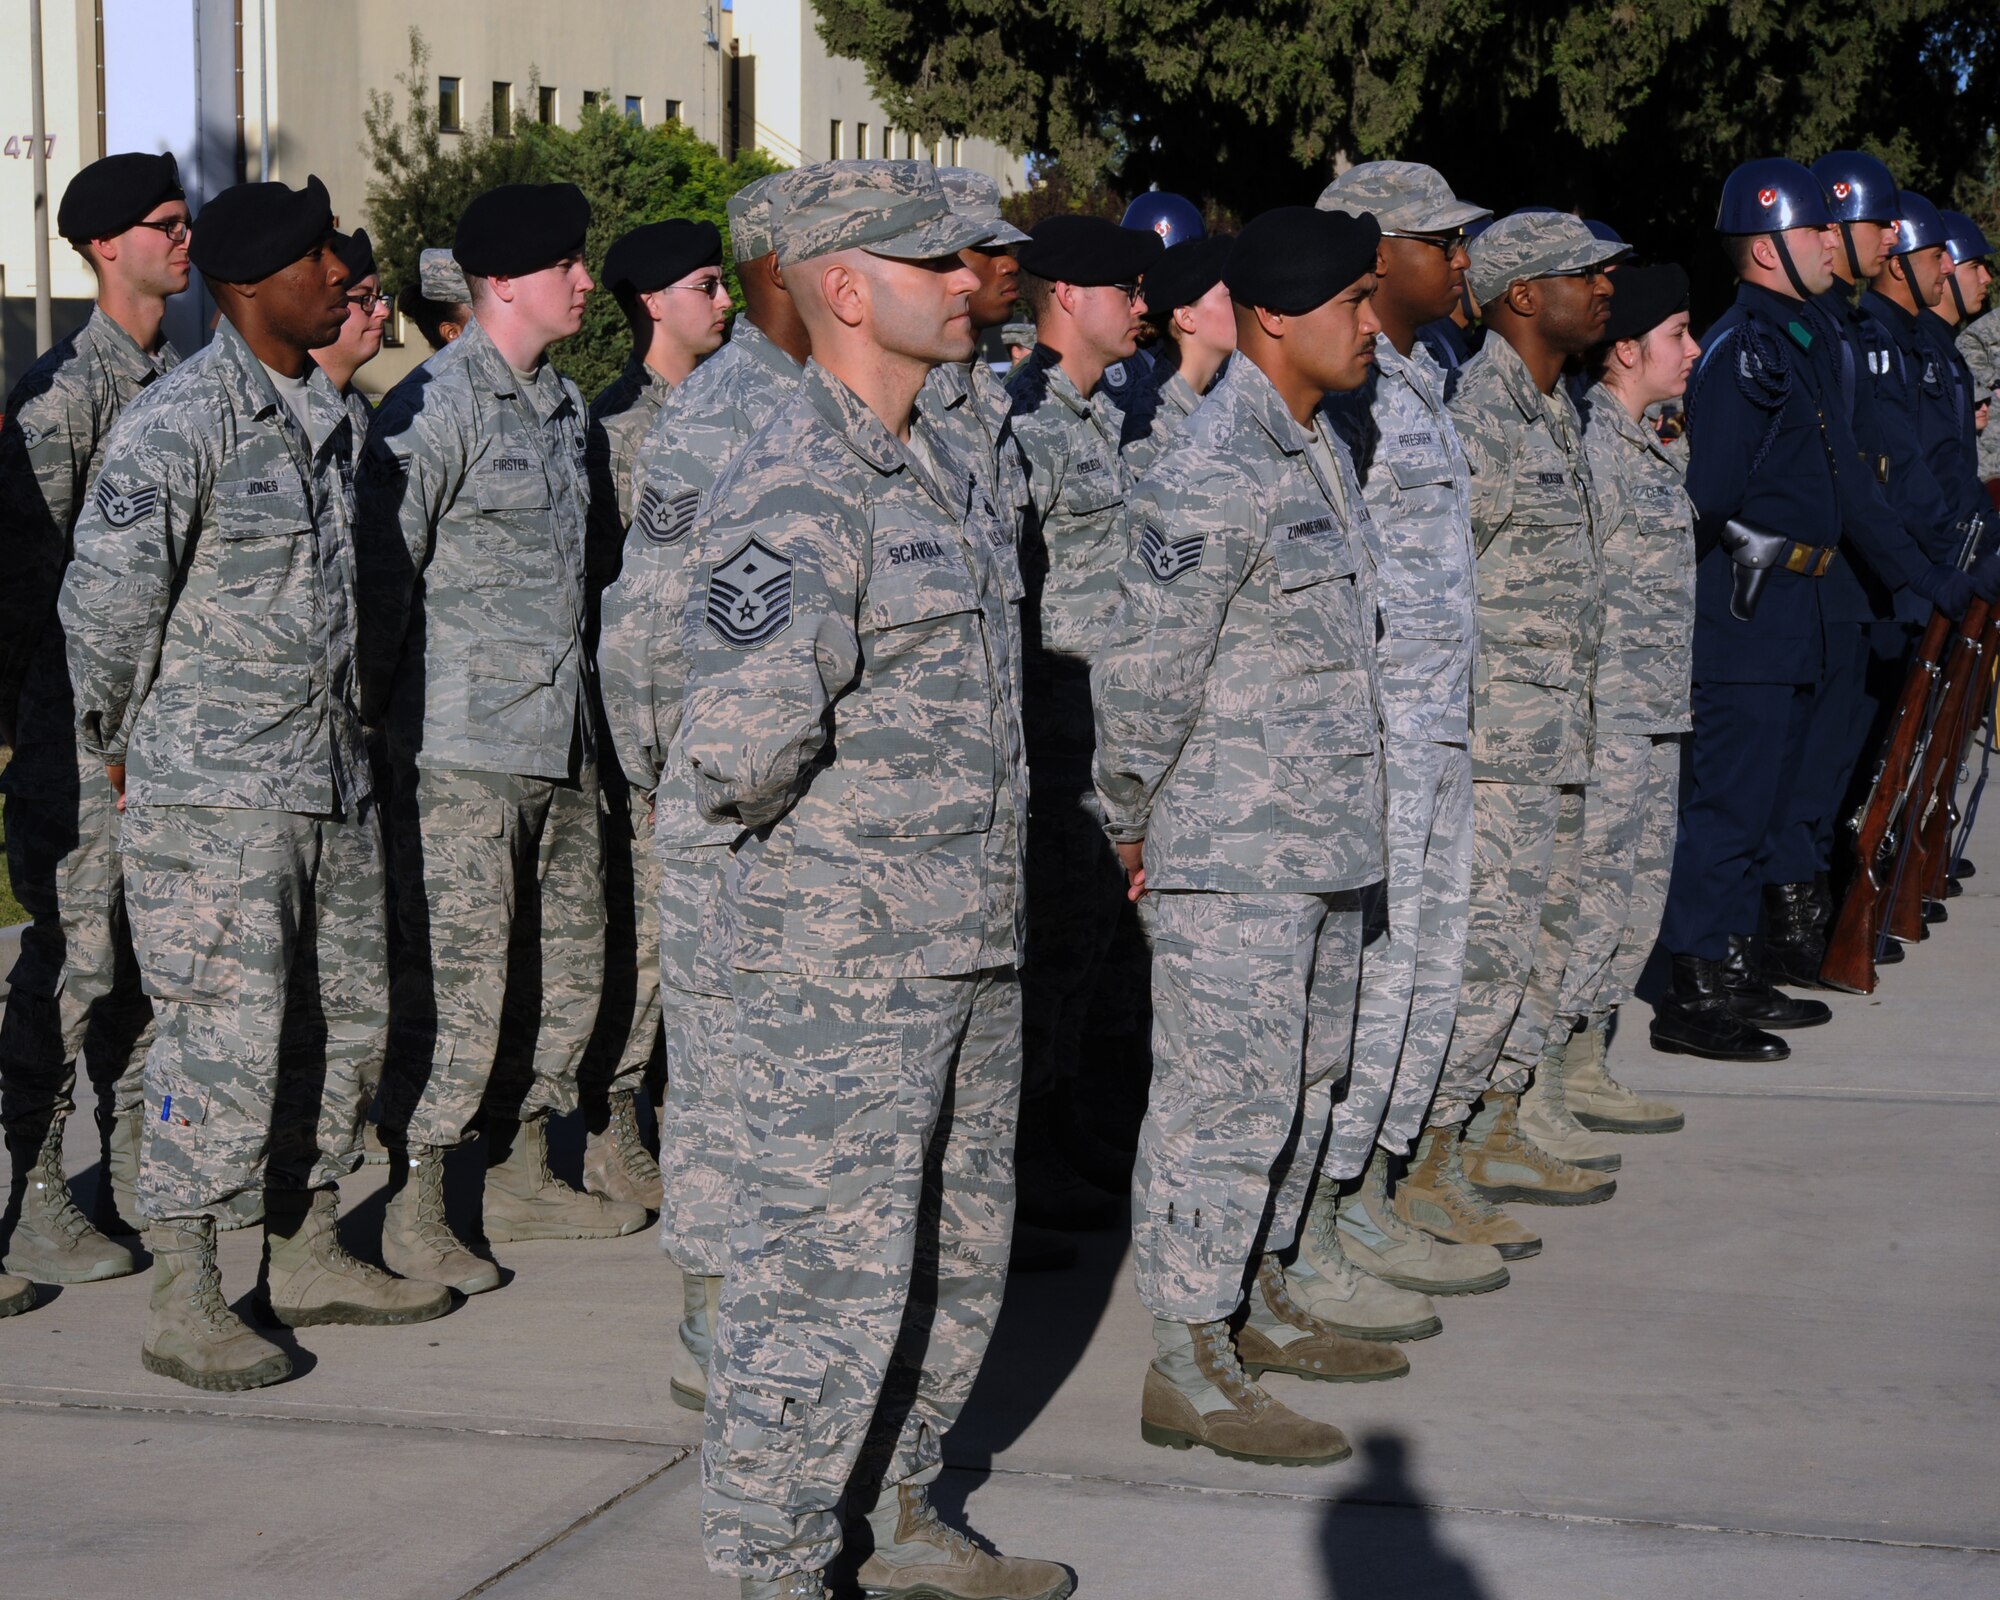 U.S. and Turkish Airmen stand at parade rest during a Veterans Day ceremony Nov. 11, 2015, at Incirlik Air Base, Turkey. Veterans Day is a U.S. federal holiday to honor military veterans who have served in the U.S. Armed Forces. (U.S. Air Force photo by Airman 1st Class Daniel Lile/Released)